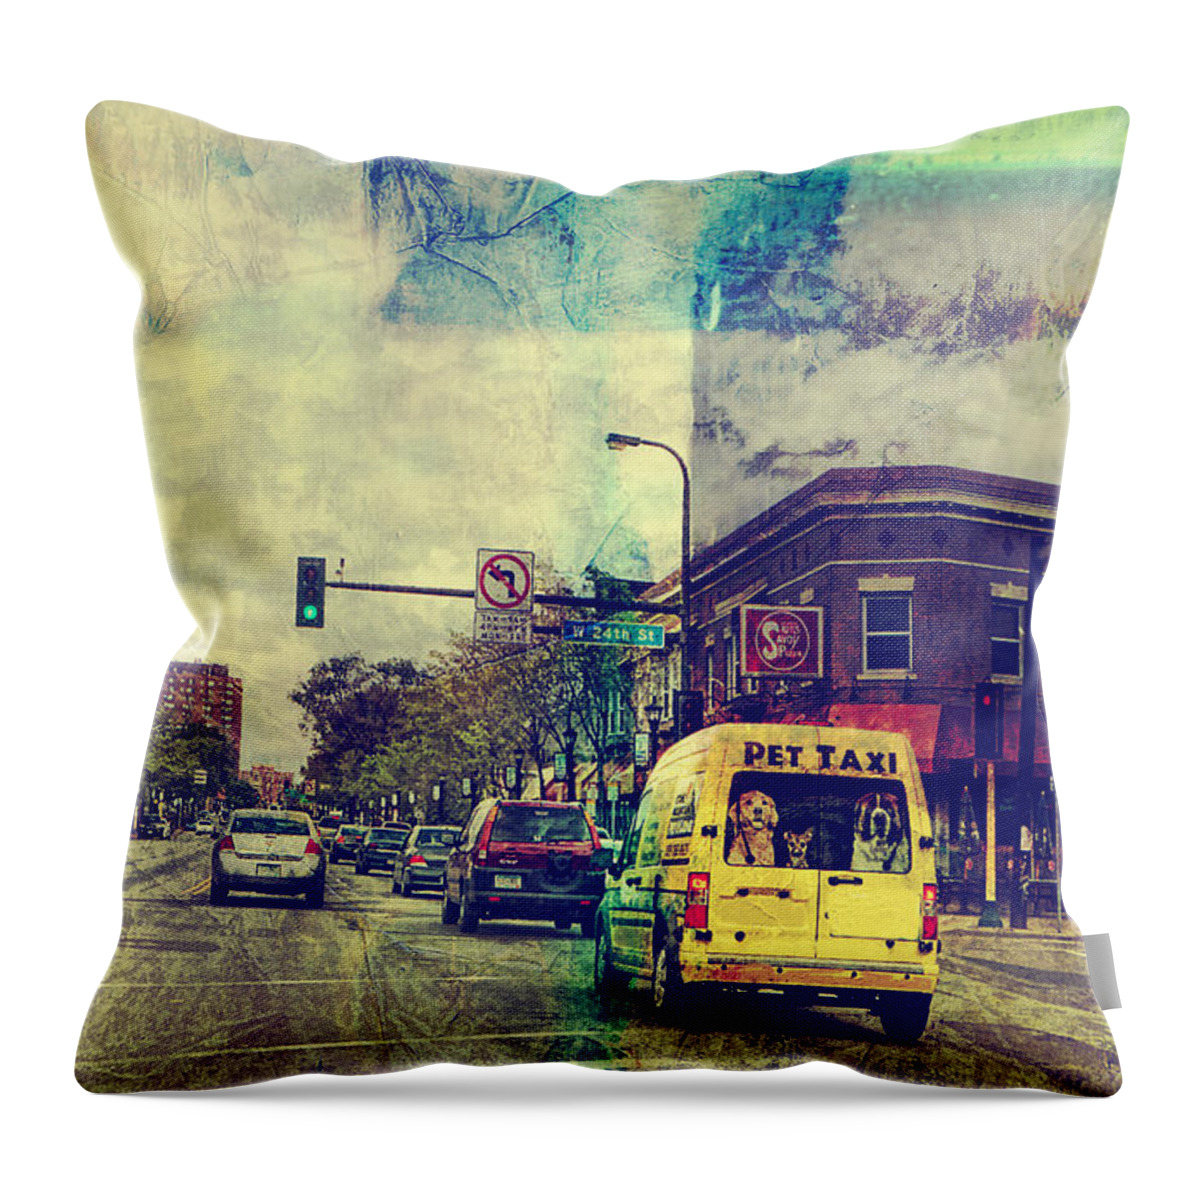 Mpls. Throw Pillow featuring the photograph Pet Taxi by Susan Stone